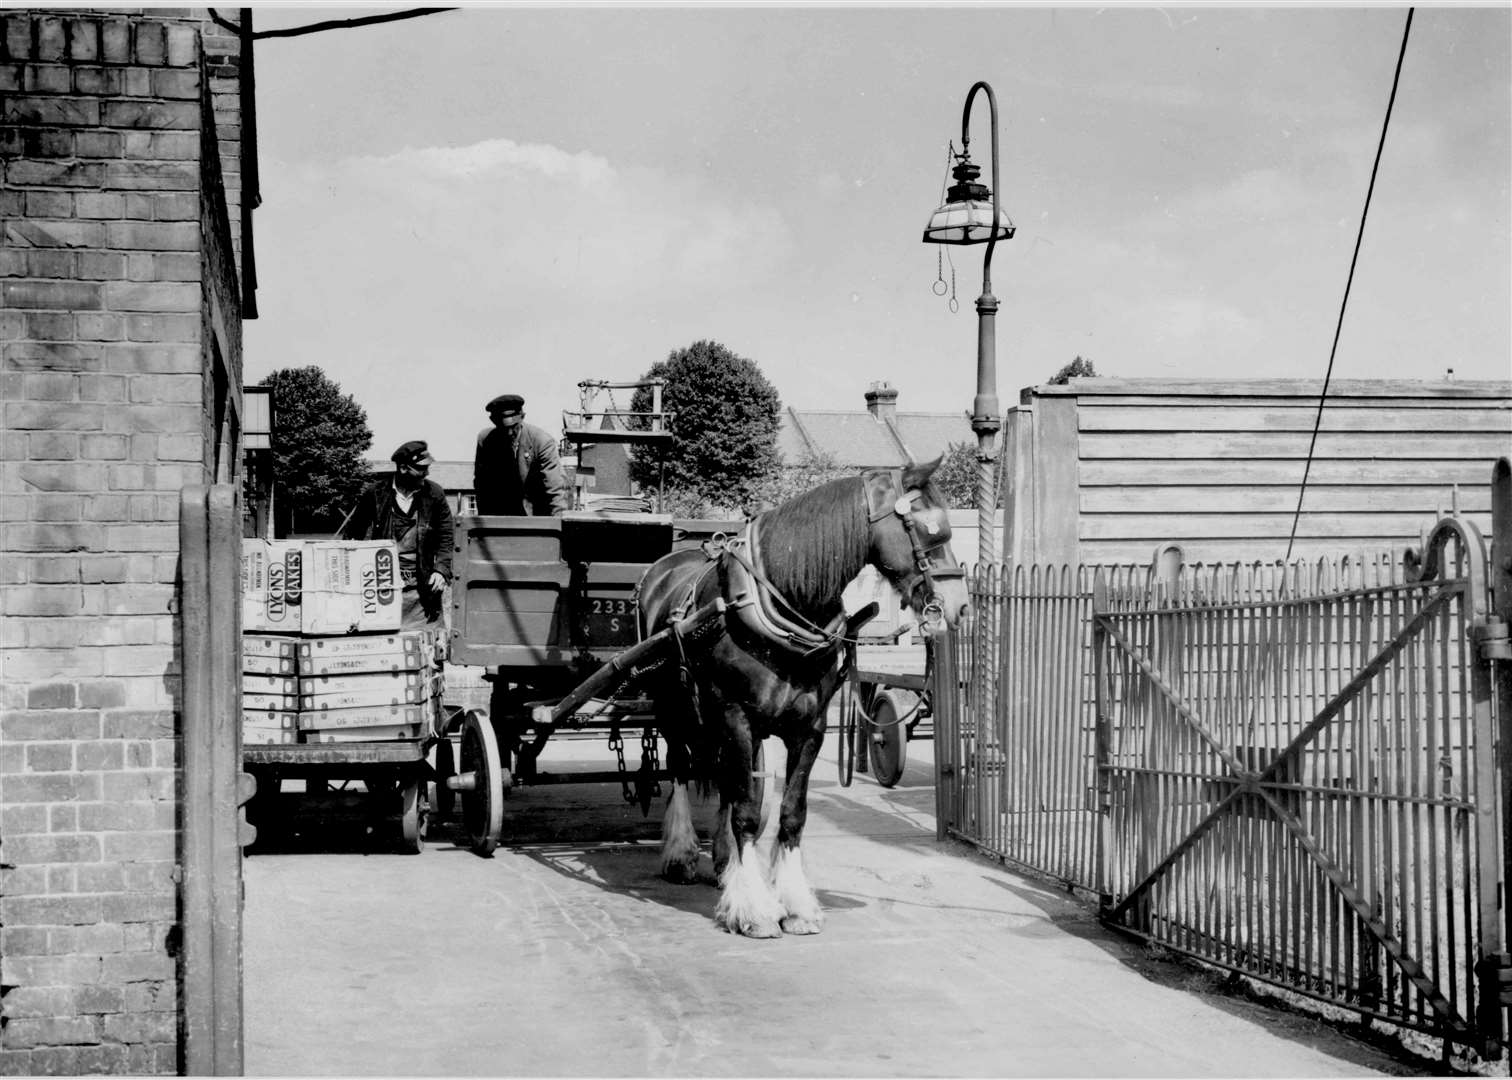 In June 1952, Canterbury said goodbye to four British Rail horses which had become a familiar sight in the city's streets. They had lost their job to lorries!